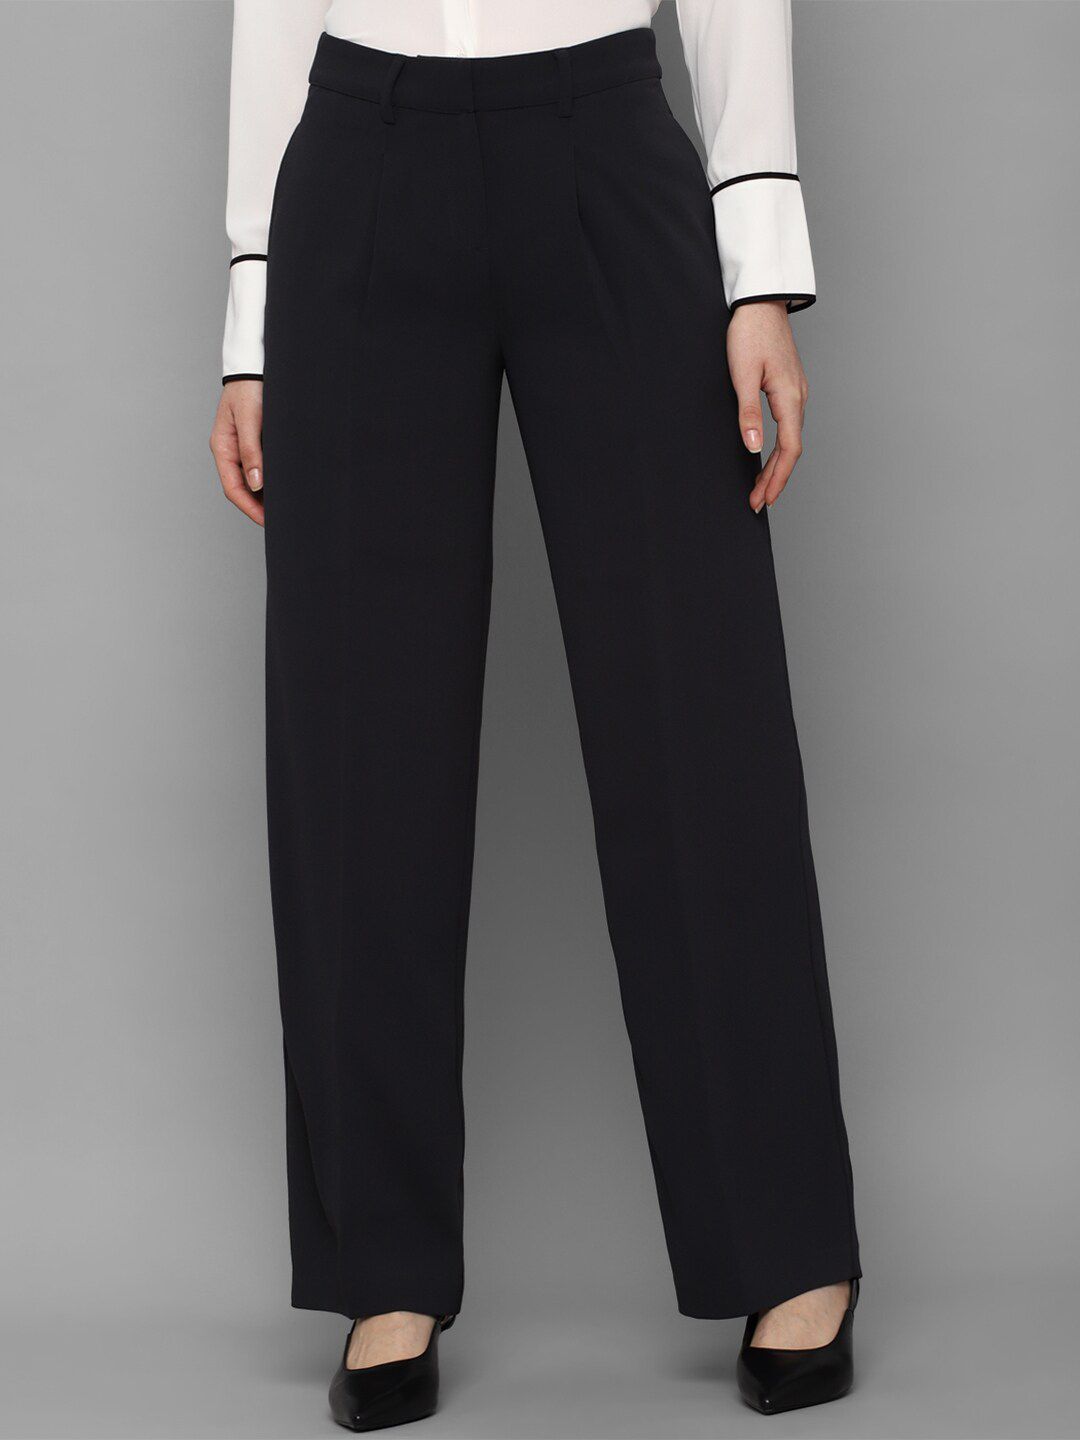 Allen Solly Woman  Black Trousers Price in India